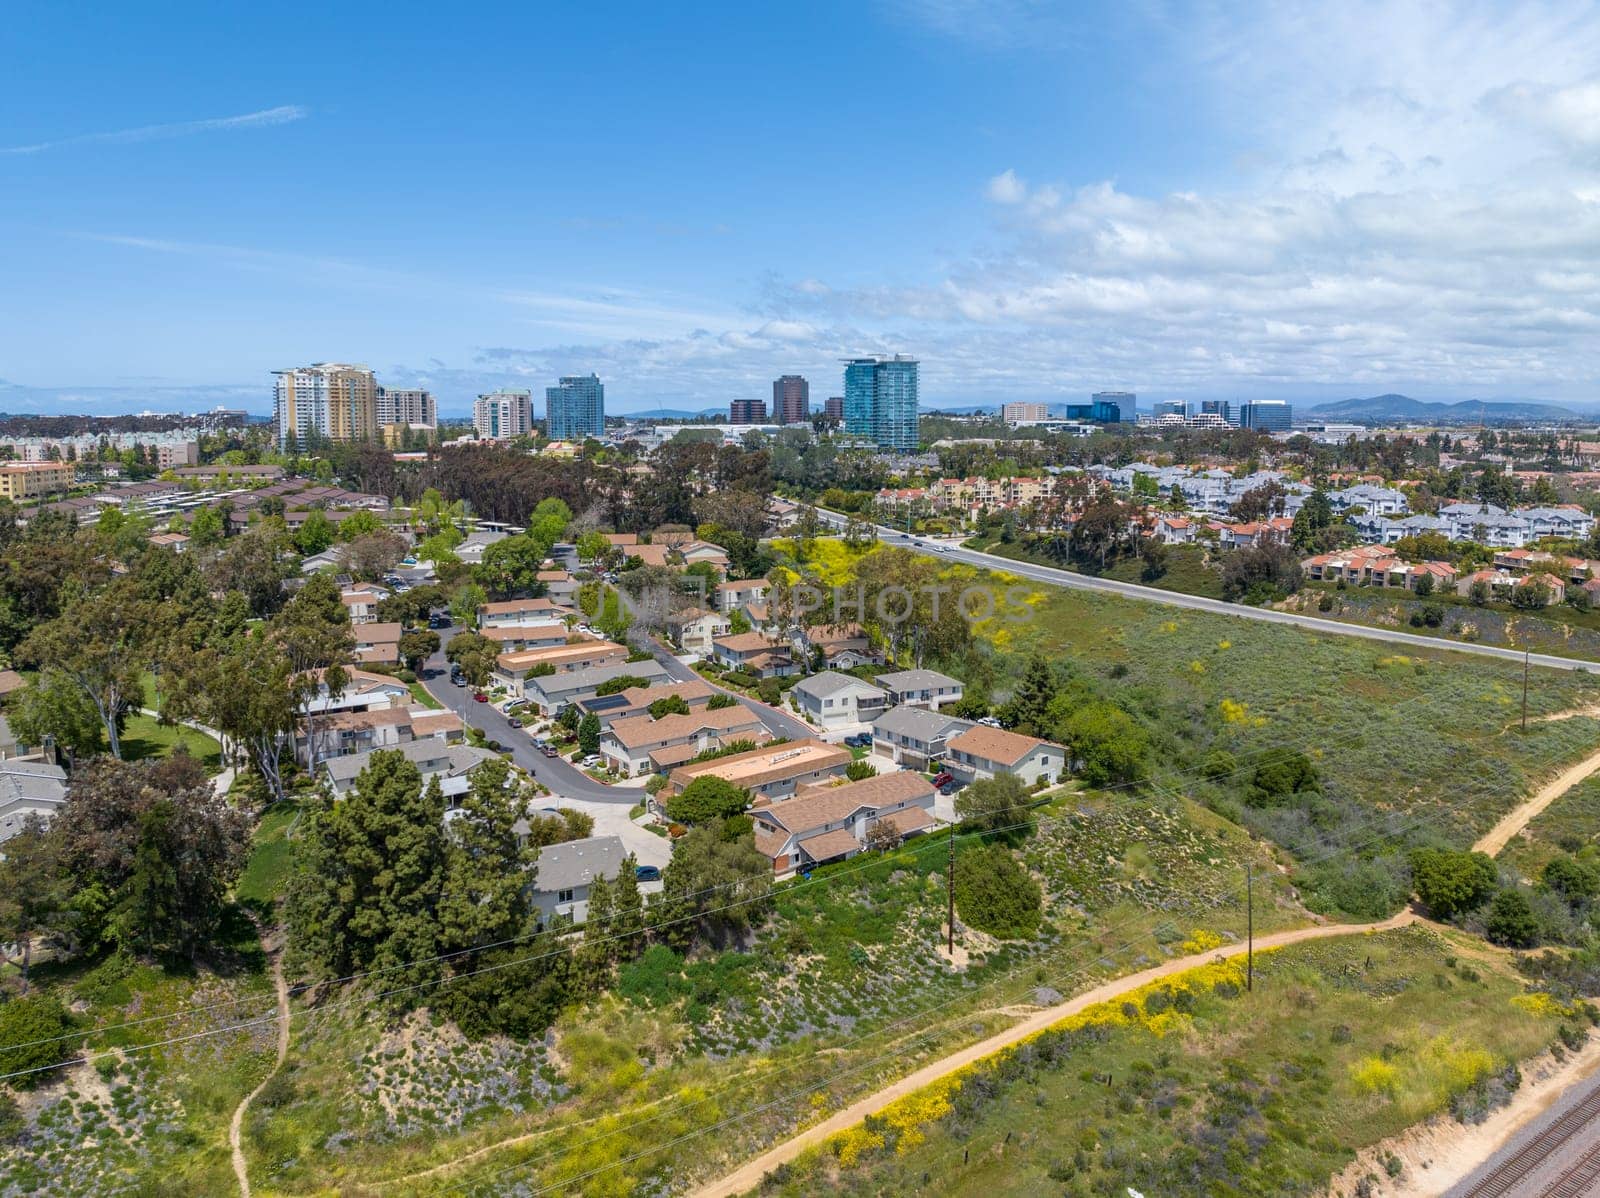 Aerial view over houses and condos in San Diego, California, USA